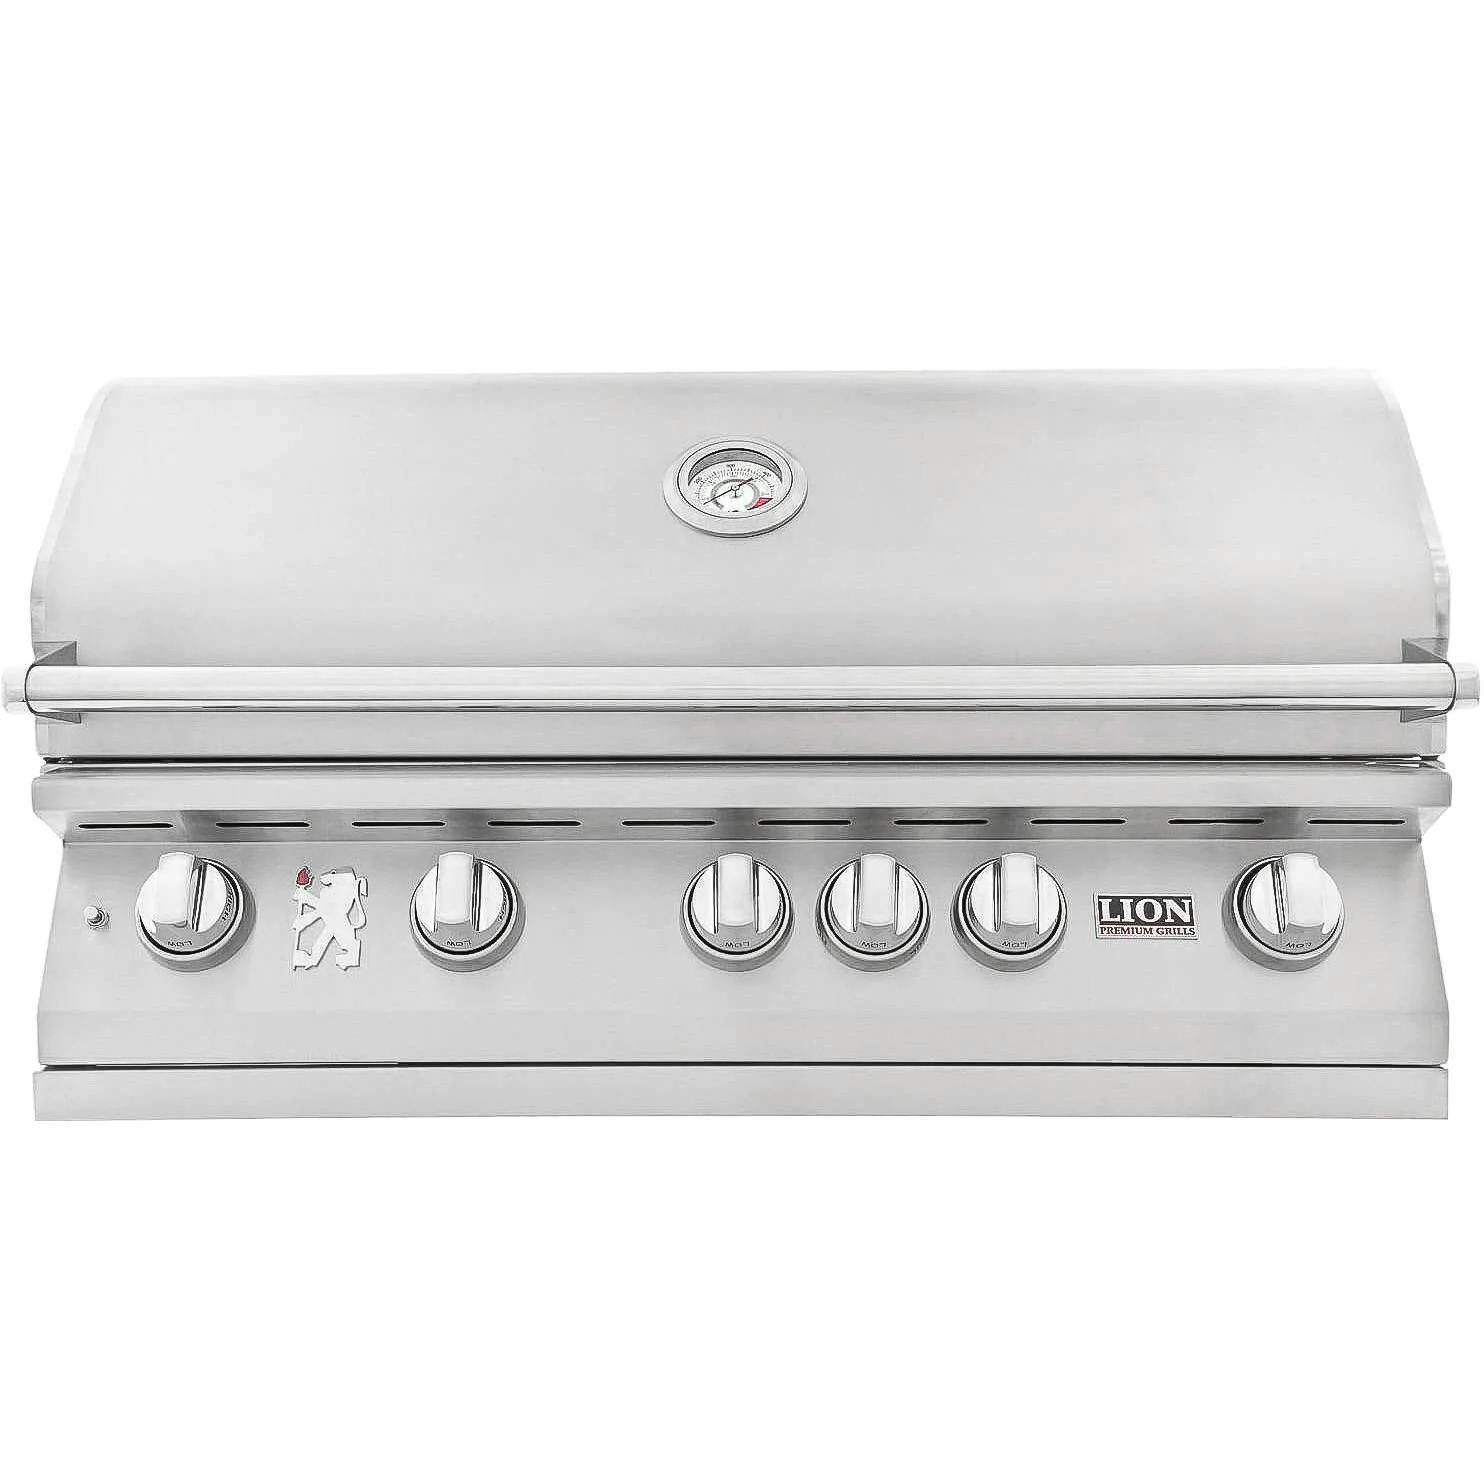 Lion L90000 Built-in Gas Grill · 40 in. · Propane